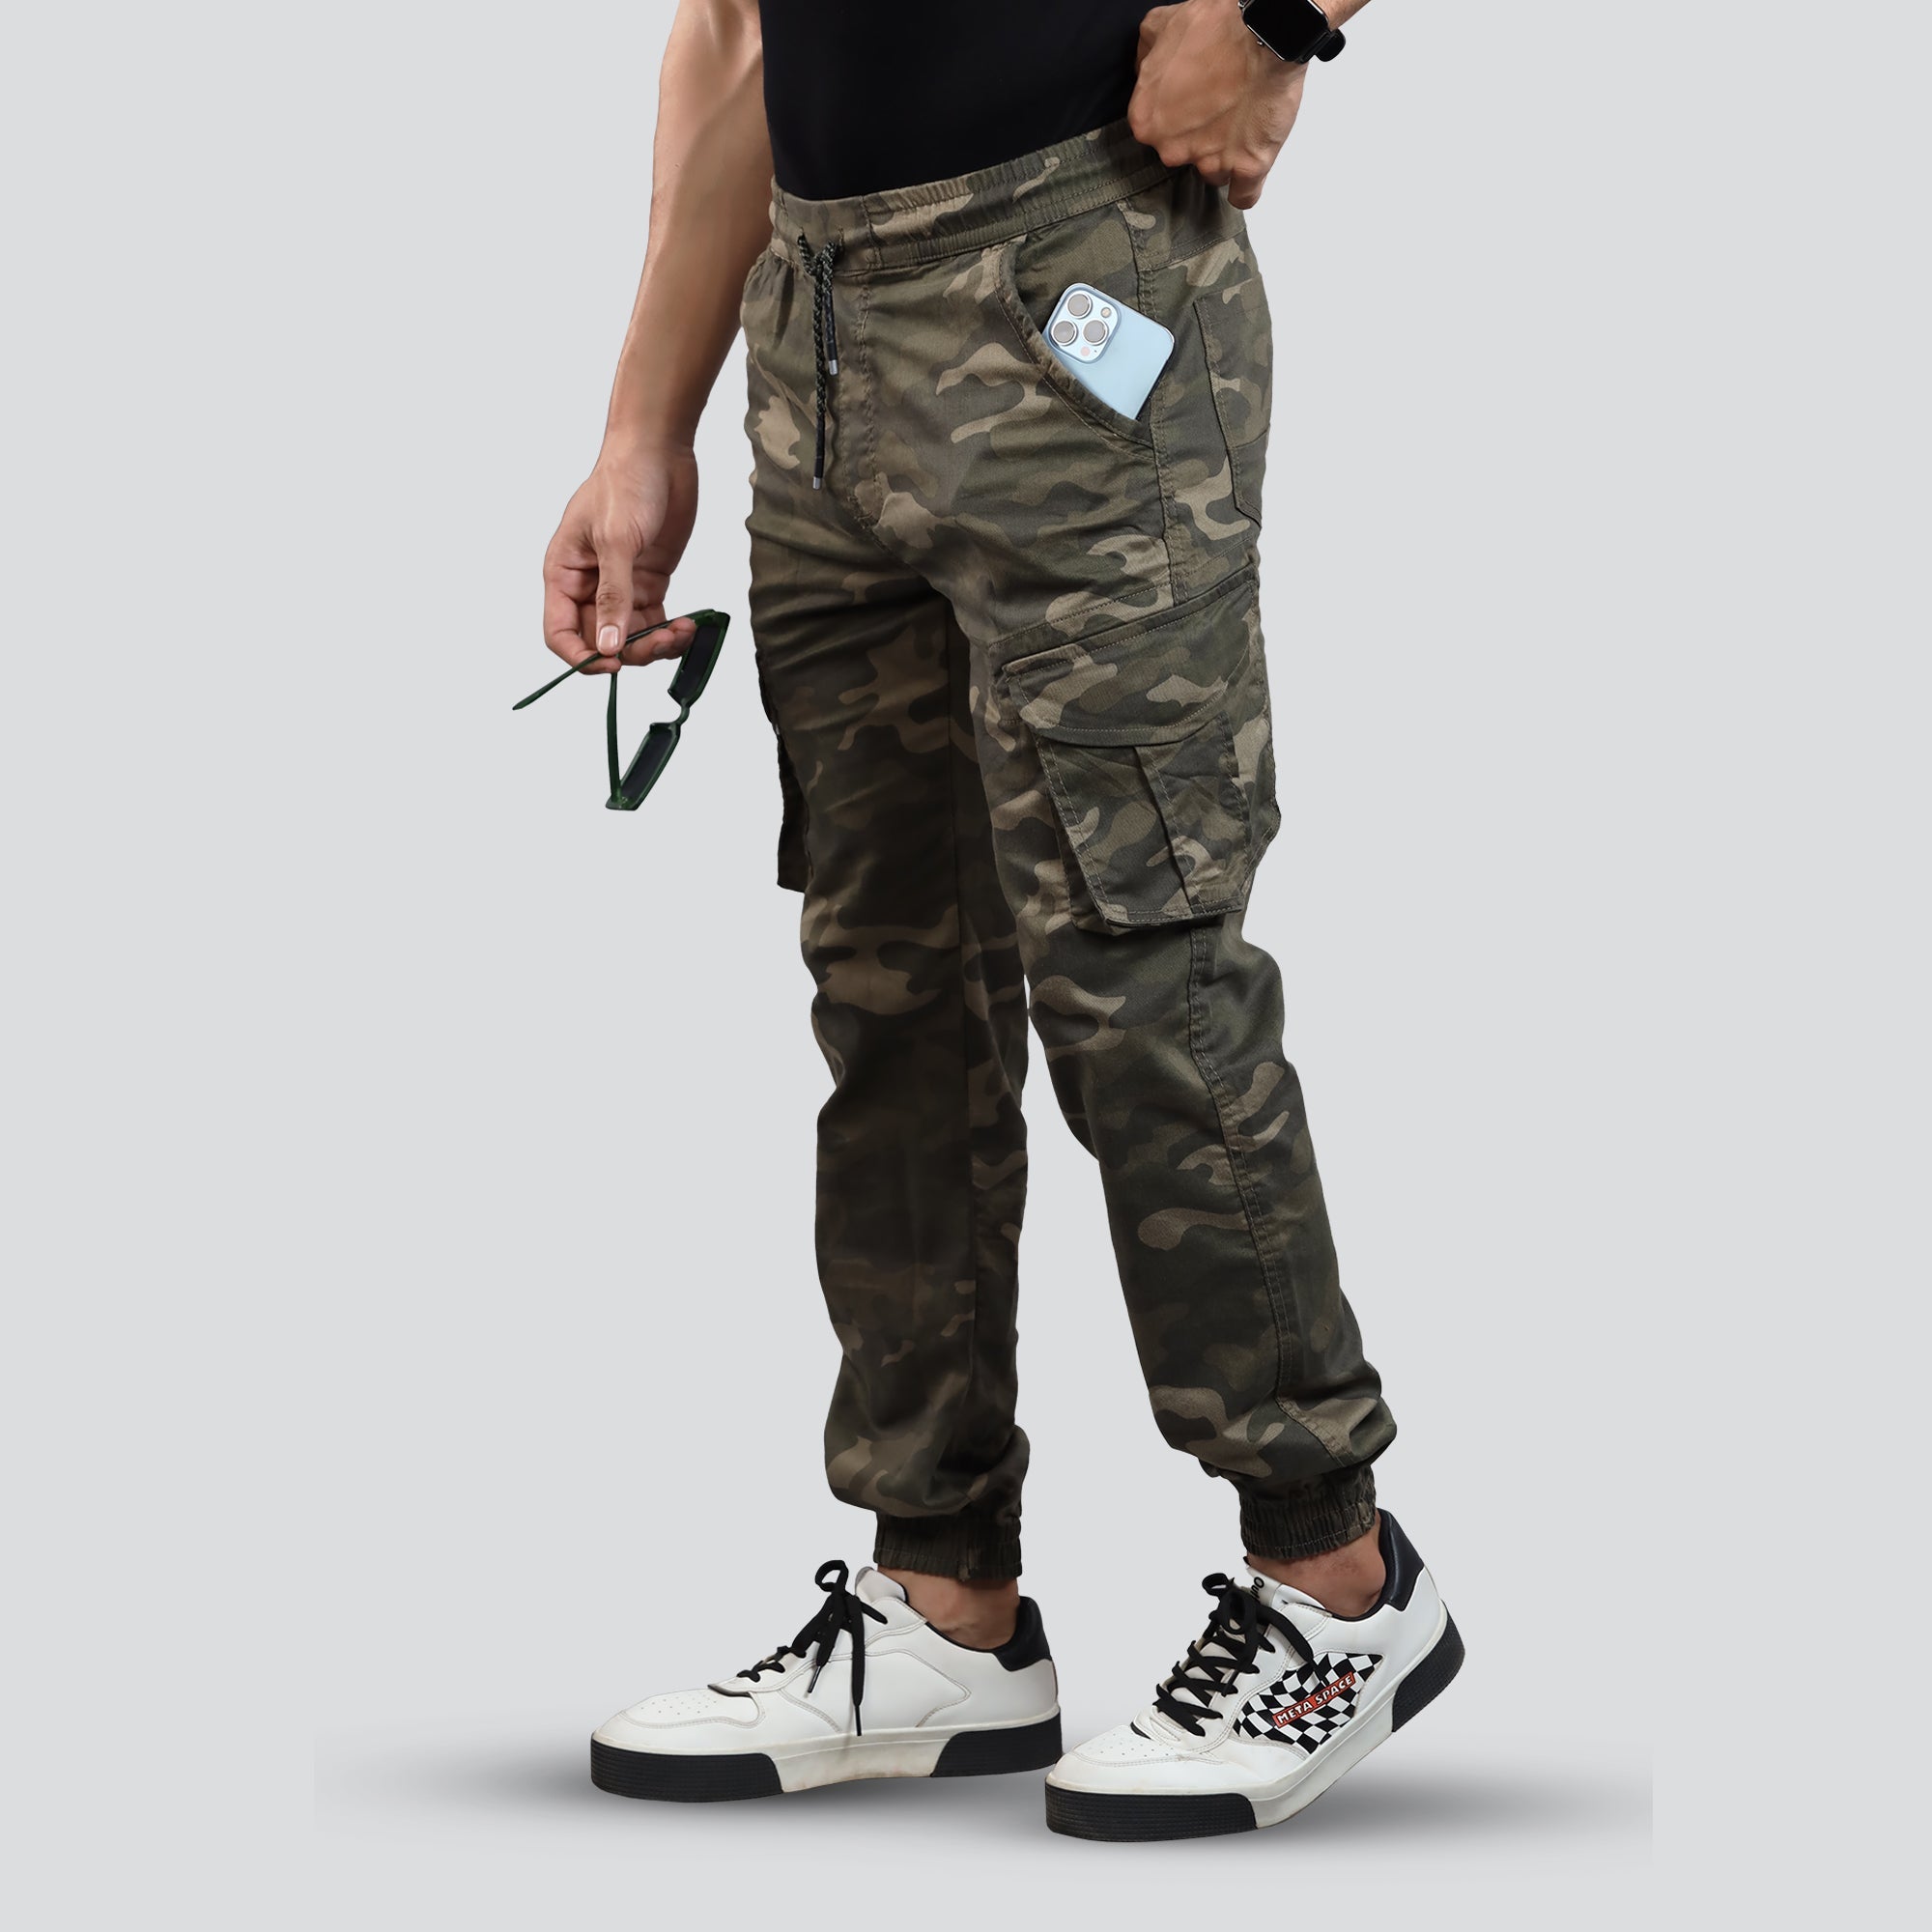 Flush - Men's Camouflage Cargo Pants, Stretchable Trousers With 6 Pock ...